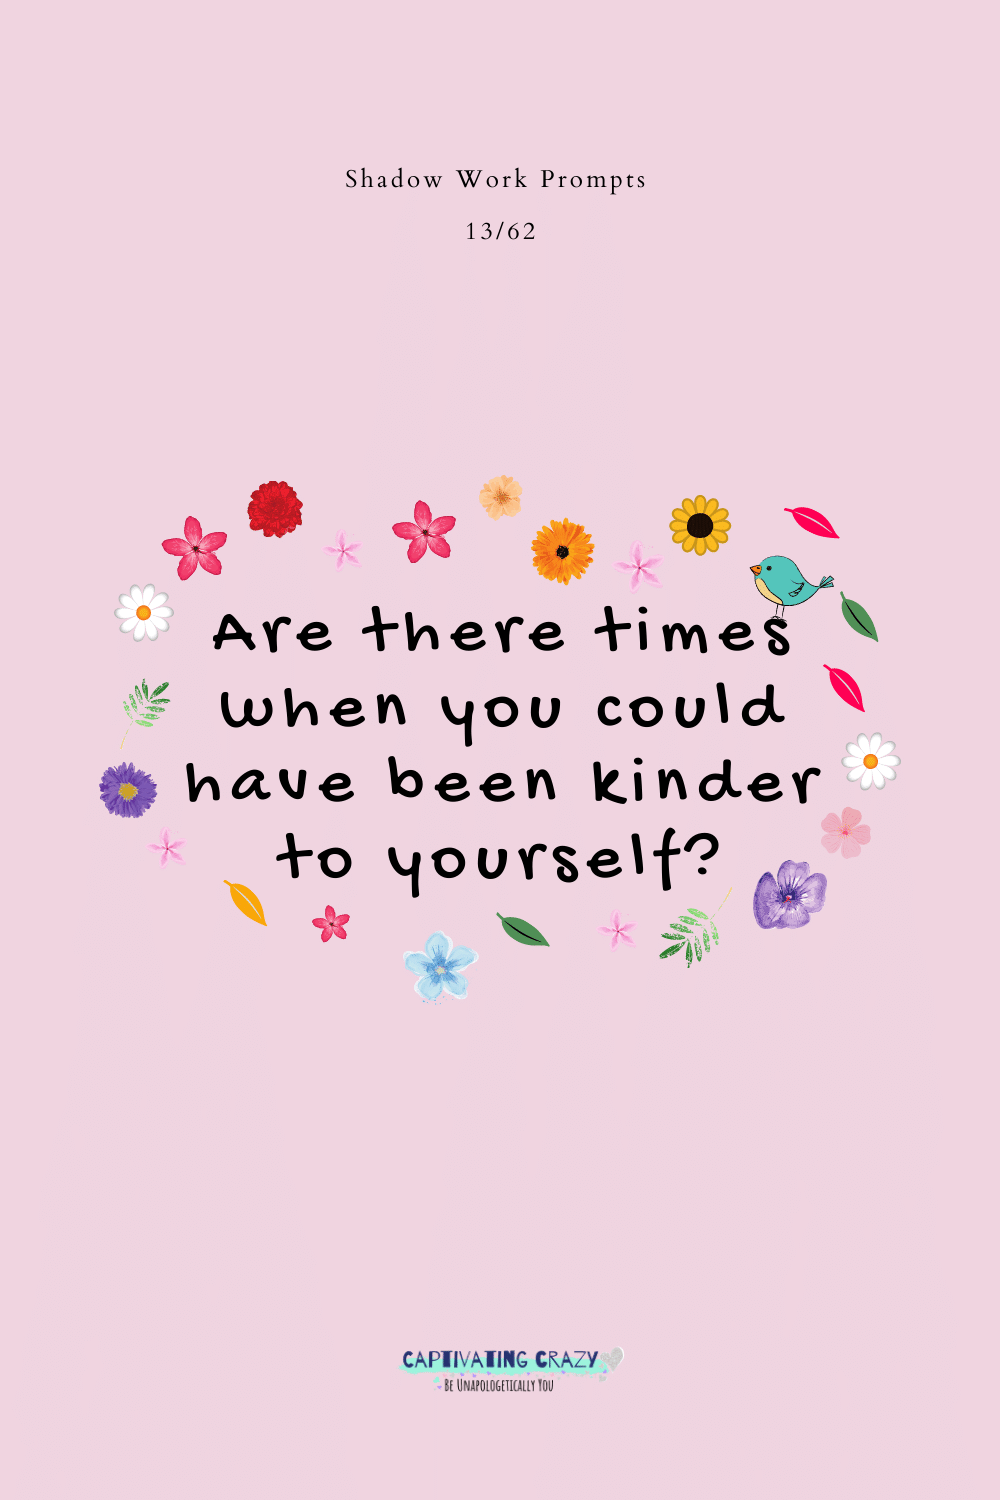 Are there times when you could have been kinder to yourself?